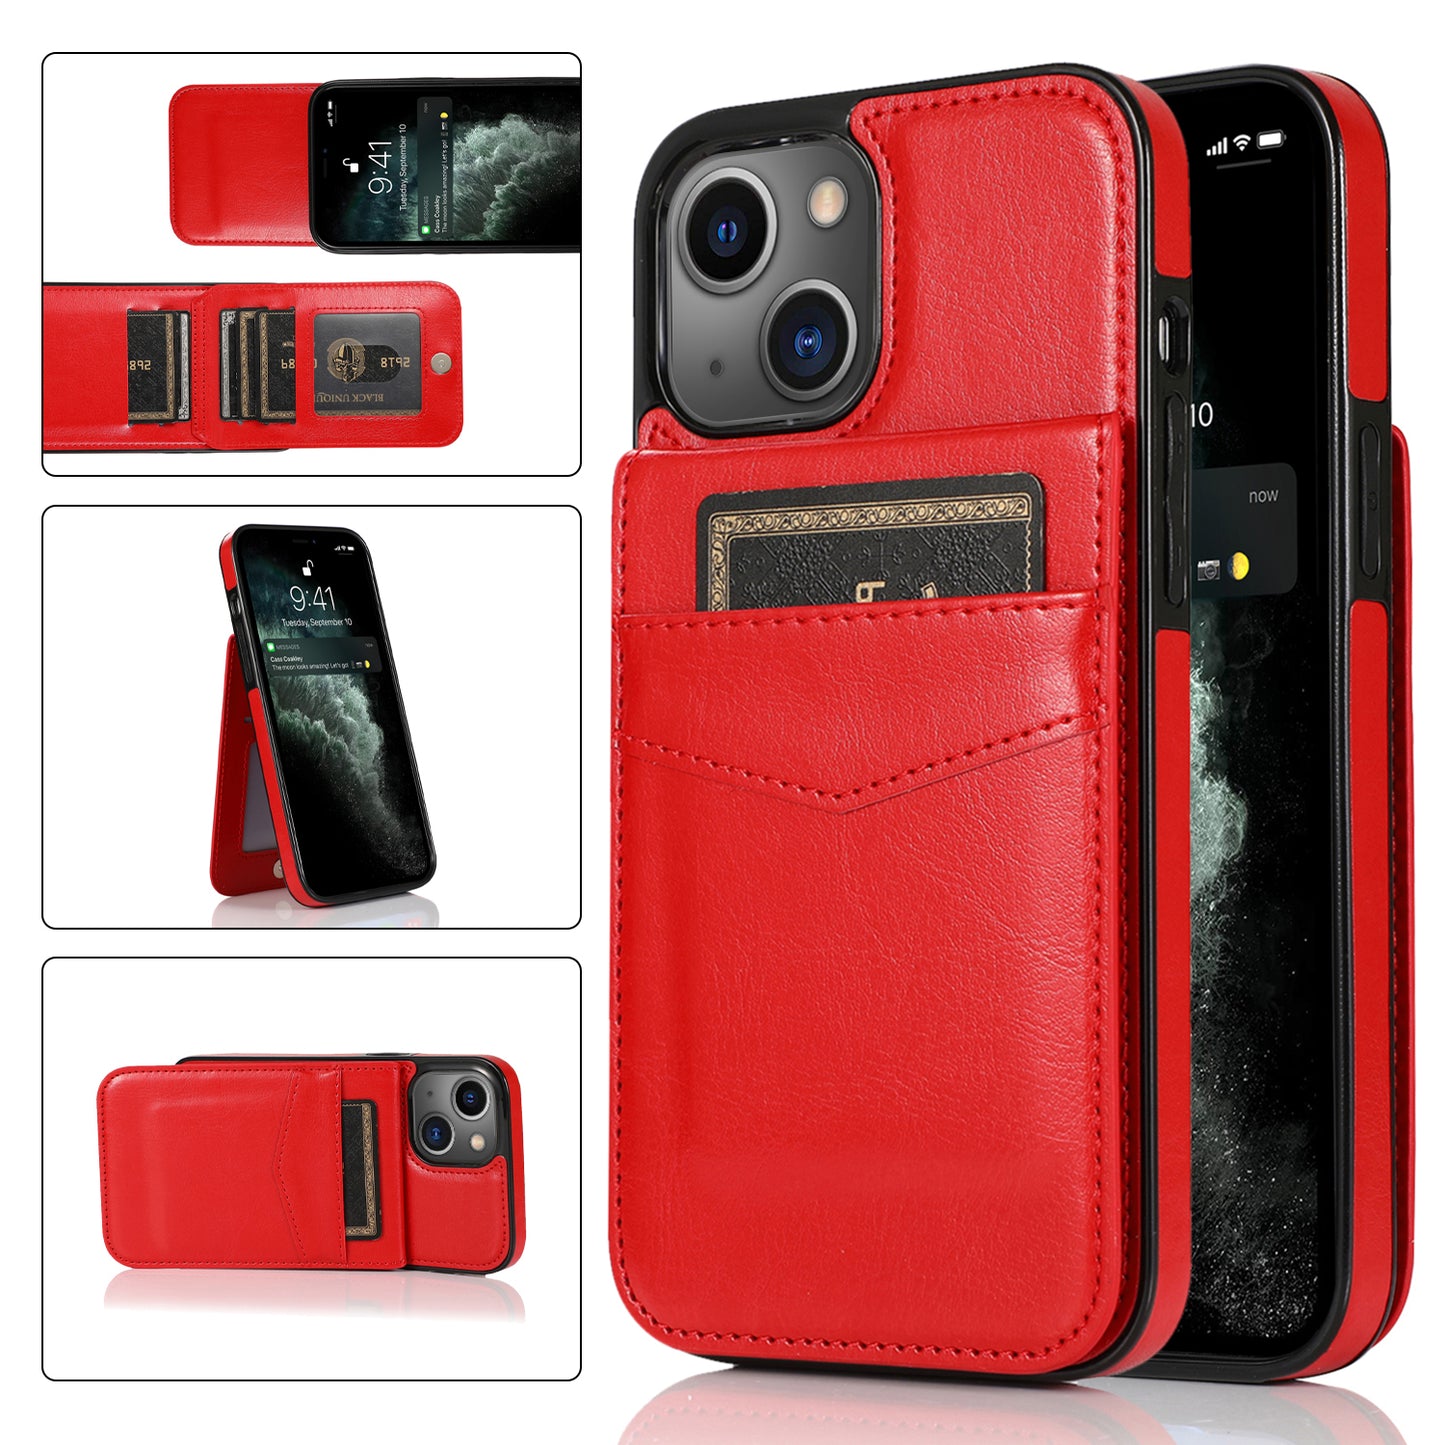 Apple iPhone 13 Leather Cover Vertical Horiznatal Kickstand with Card Slots